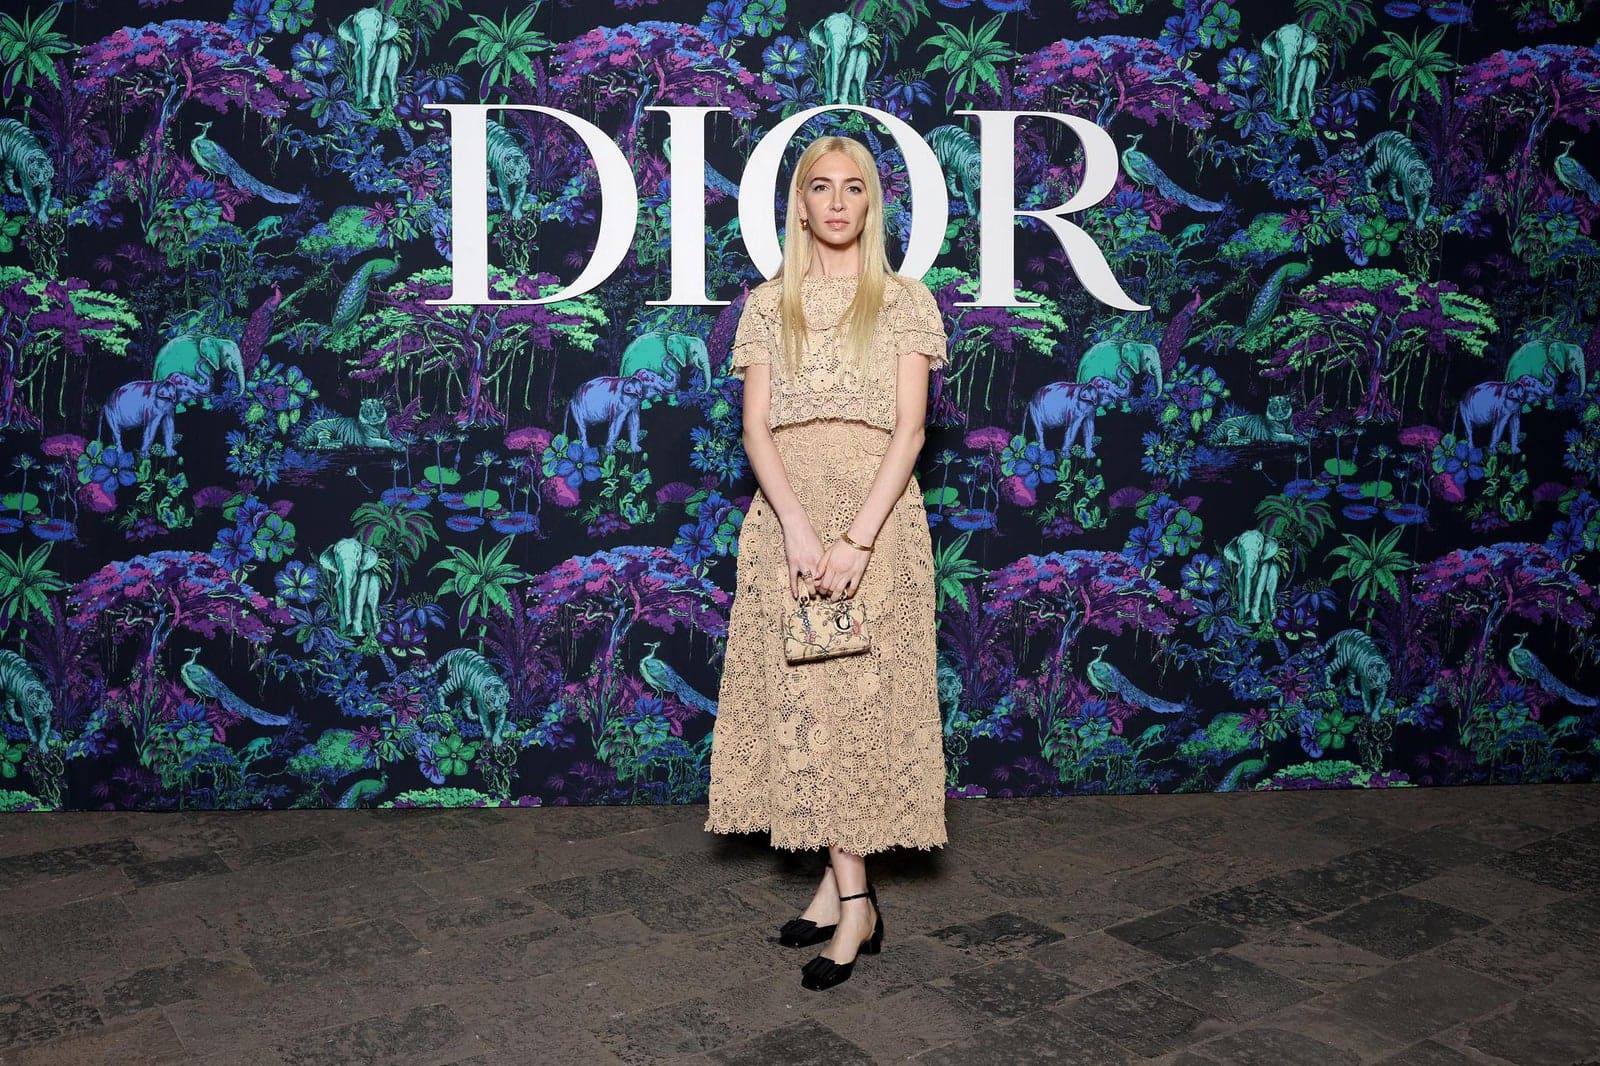 Dior Fall/Winter 2023 Show In Mumbai Sabine Getty wore a Dior Spring-Summer 2023 embroidered beige top and skirt.